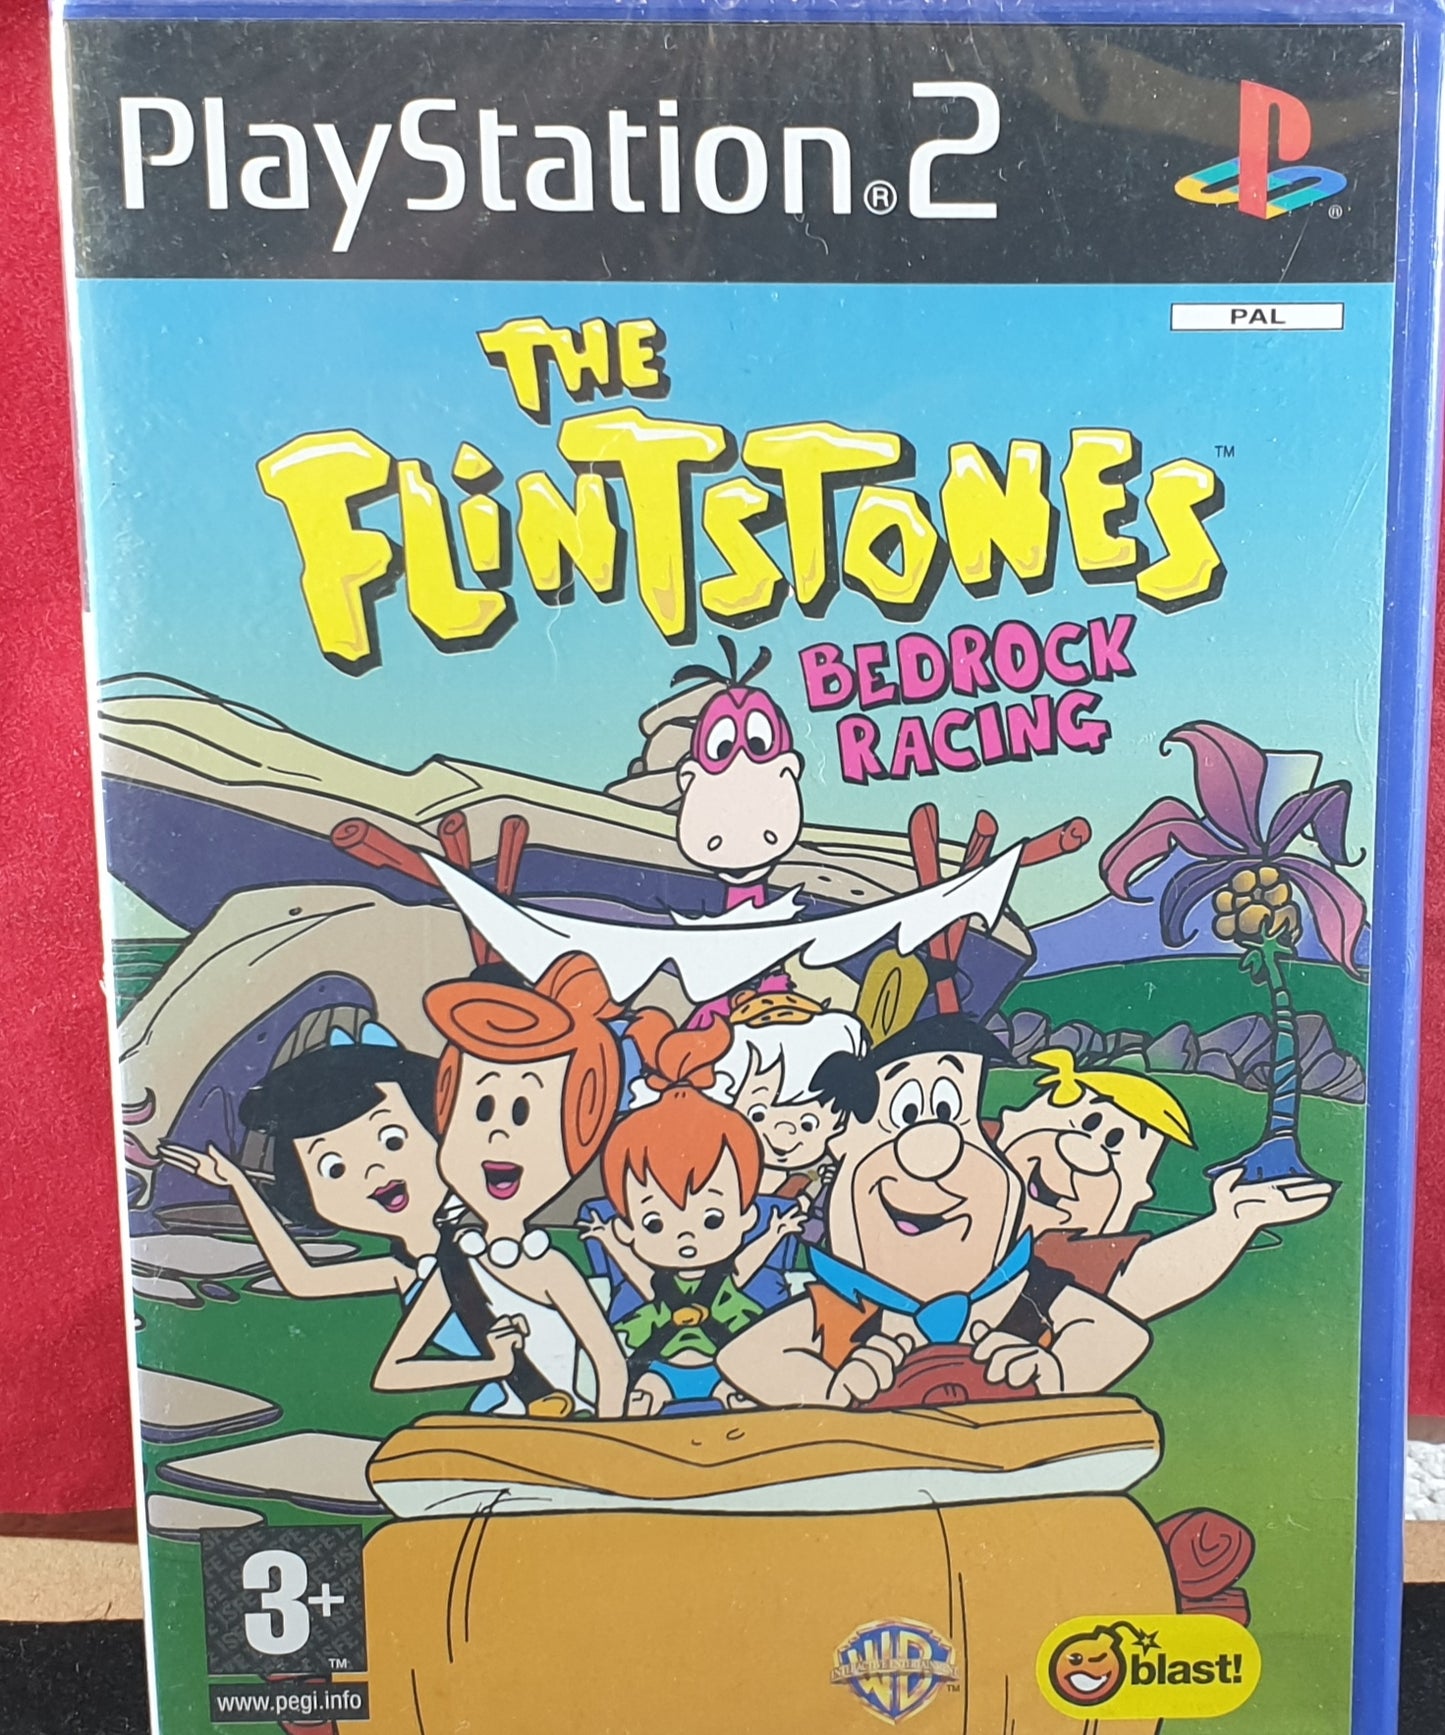 Brand New and Sealed The Flintstones Bedrock Racing Sony Playstation 2 (PS2) Game